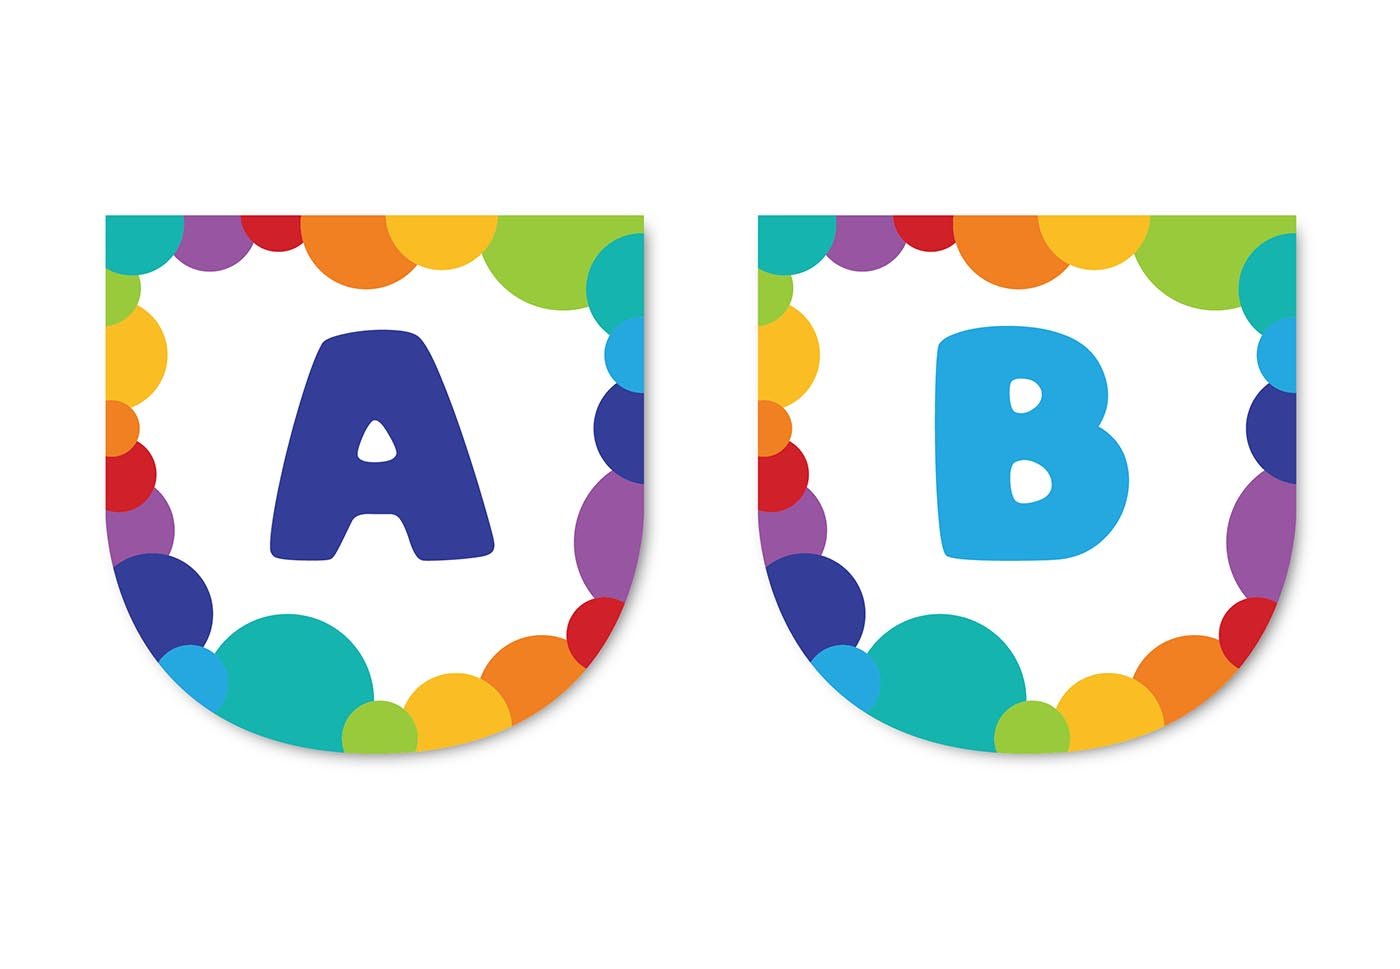 Multi colored Bulletin Board Banner Letters - Print Your Own